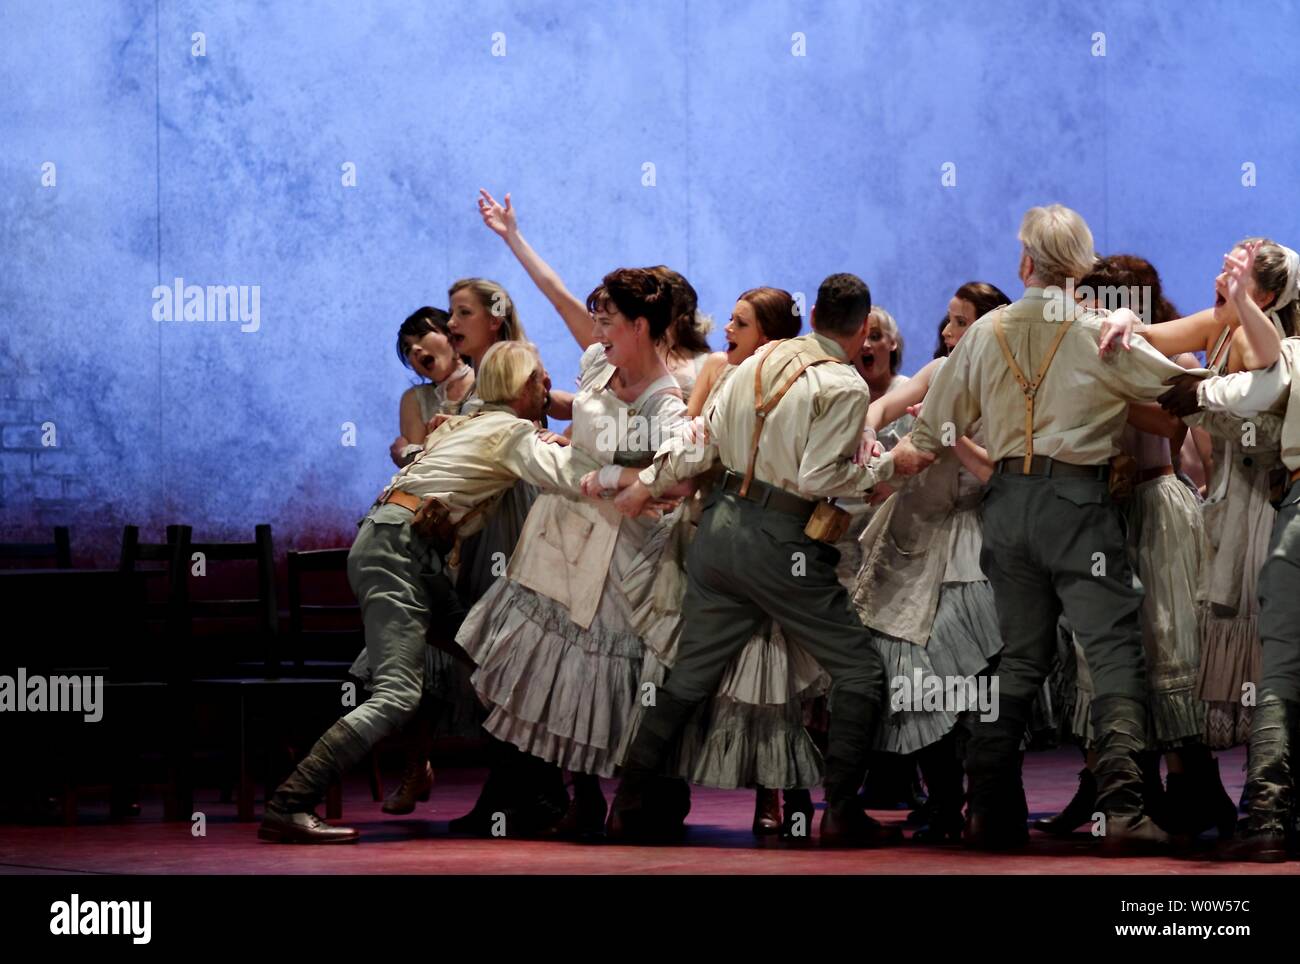 On Friday, 30 November 2018, the curtain will rise on the premiere of Georges Bizet’s Carmen in a production of Lindy Hume. She partners once again with Dan Potra, who will design both the set and the costumes. Matthias Foremny musically directs the Gewandhaus Orchestra. Wallis Giunta, a member of the ensemble and a prize winner at the International Opera Awards 2018, gives her debut as Carmen. Olena Tokar and Sandra Maxheimer also debut their roles as Micaëla und Mercédès, respectively. Leonardo Caimi sings Don José. And Gezim Myshketa takes on the role of the bullfighter Escamillo. Stock Photo